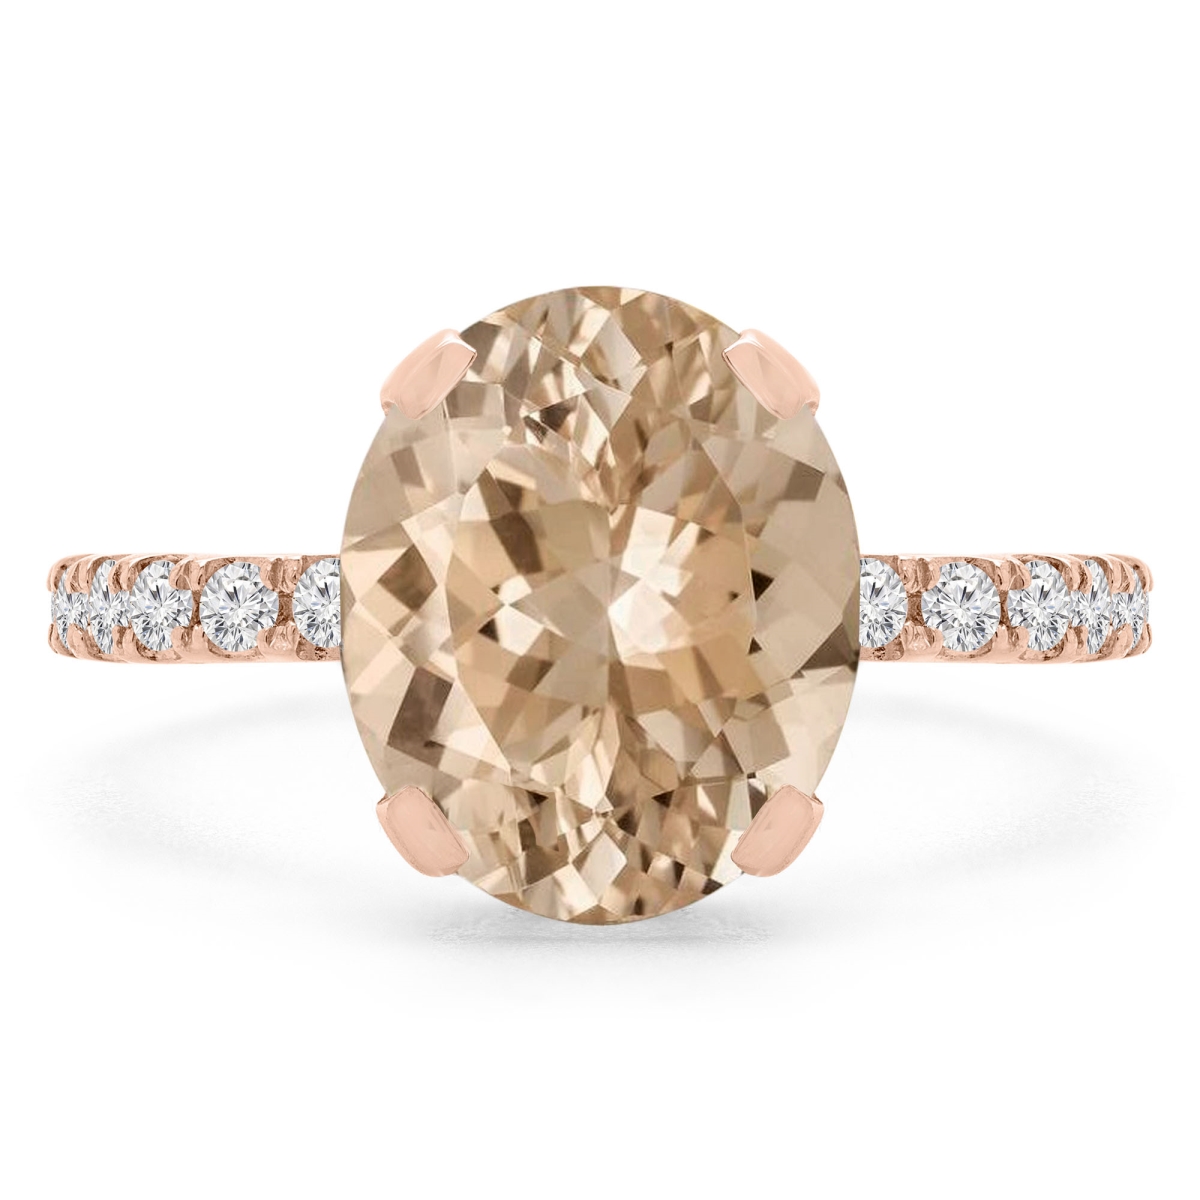 Picture of Majesty Diamonds MD190407-3.5 3.4 CTW Oval Pink Morganite Under Halo Engagement Ring in 14K Rose Gold - Size 3.5